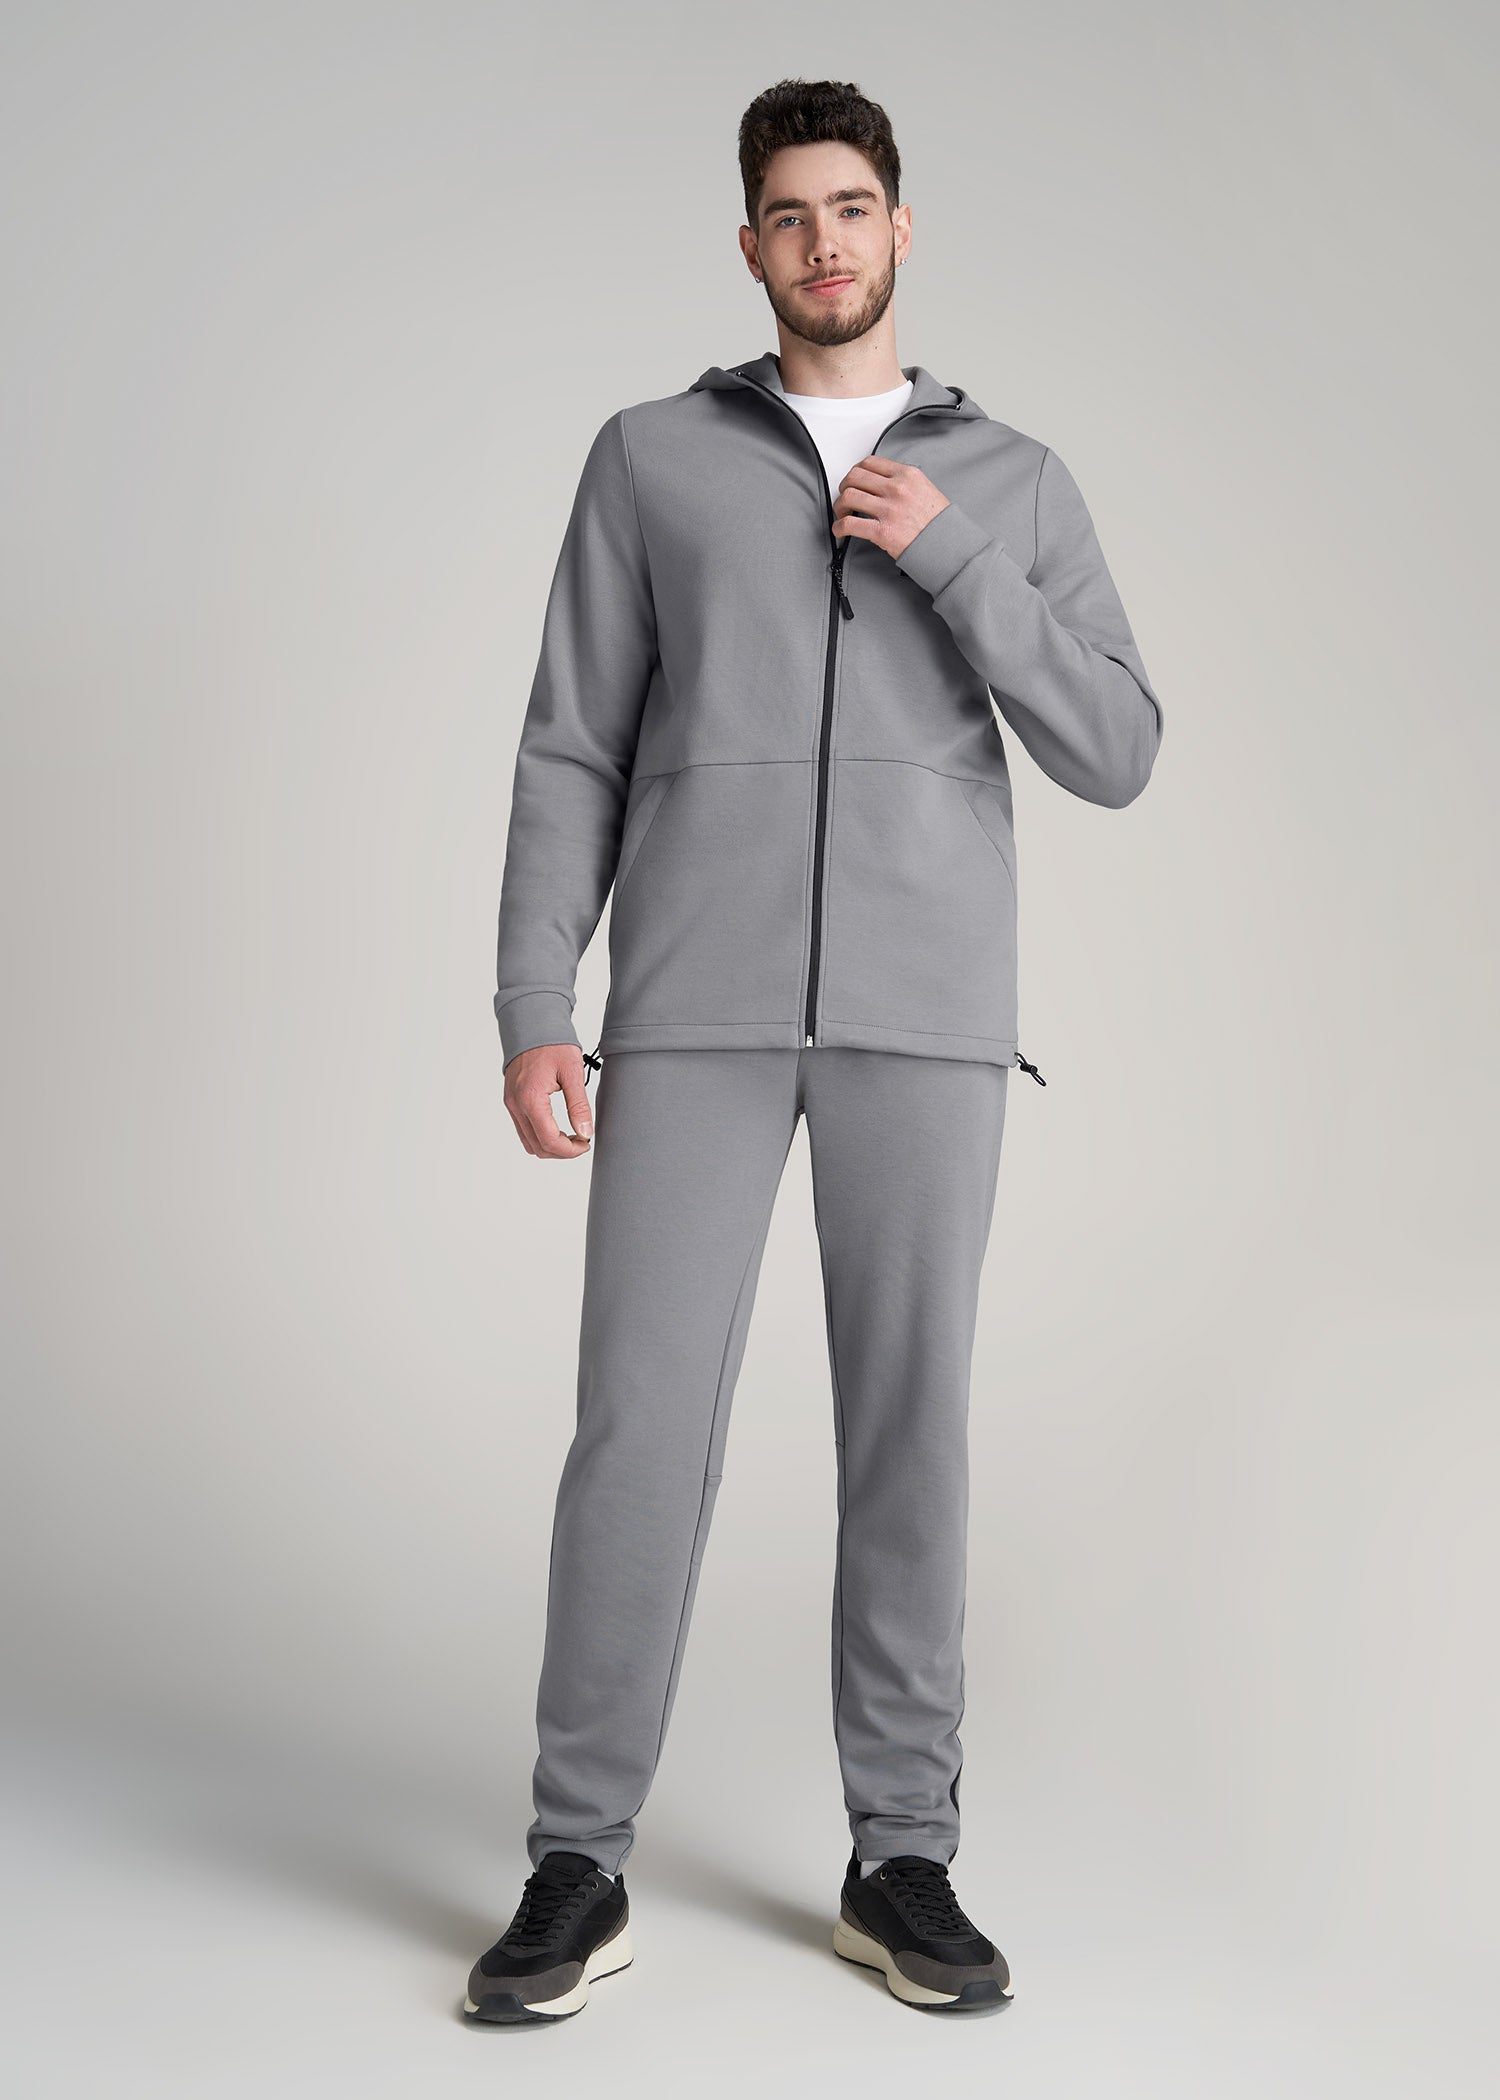     American-Tall-Men-Athleisure-Performance-Hooded-Track-Jacket-Fossil-Grey-full